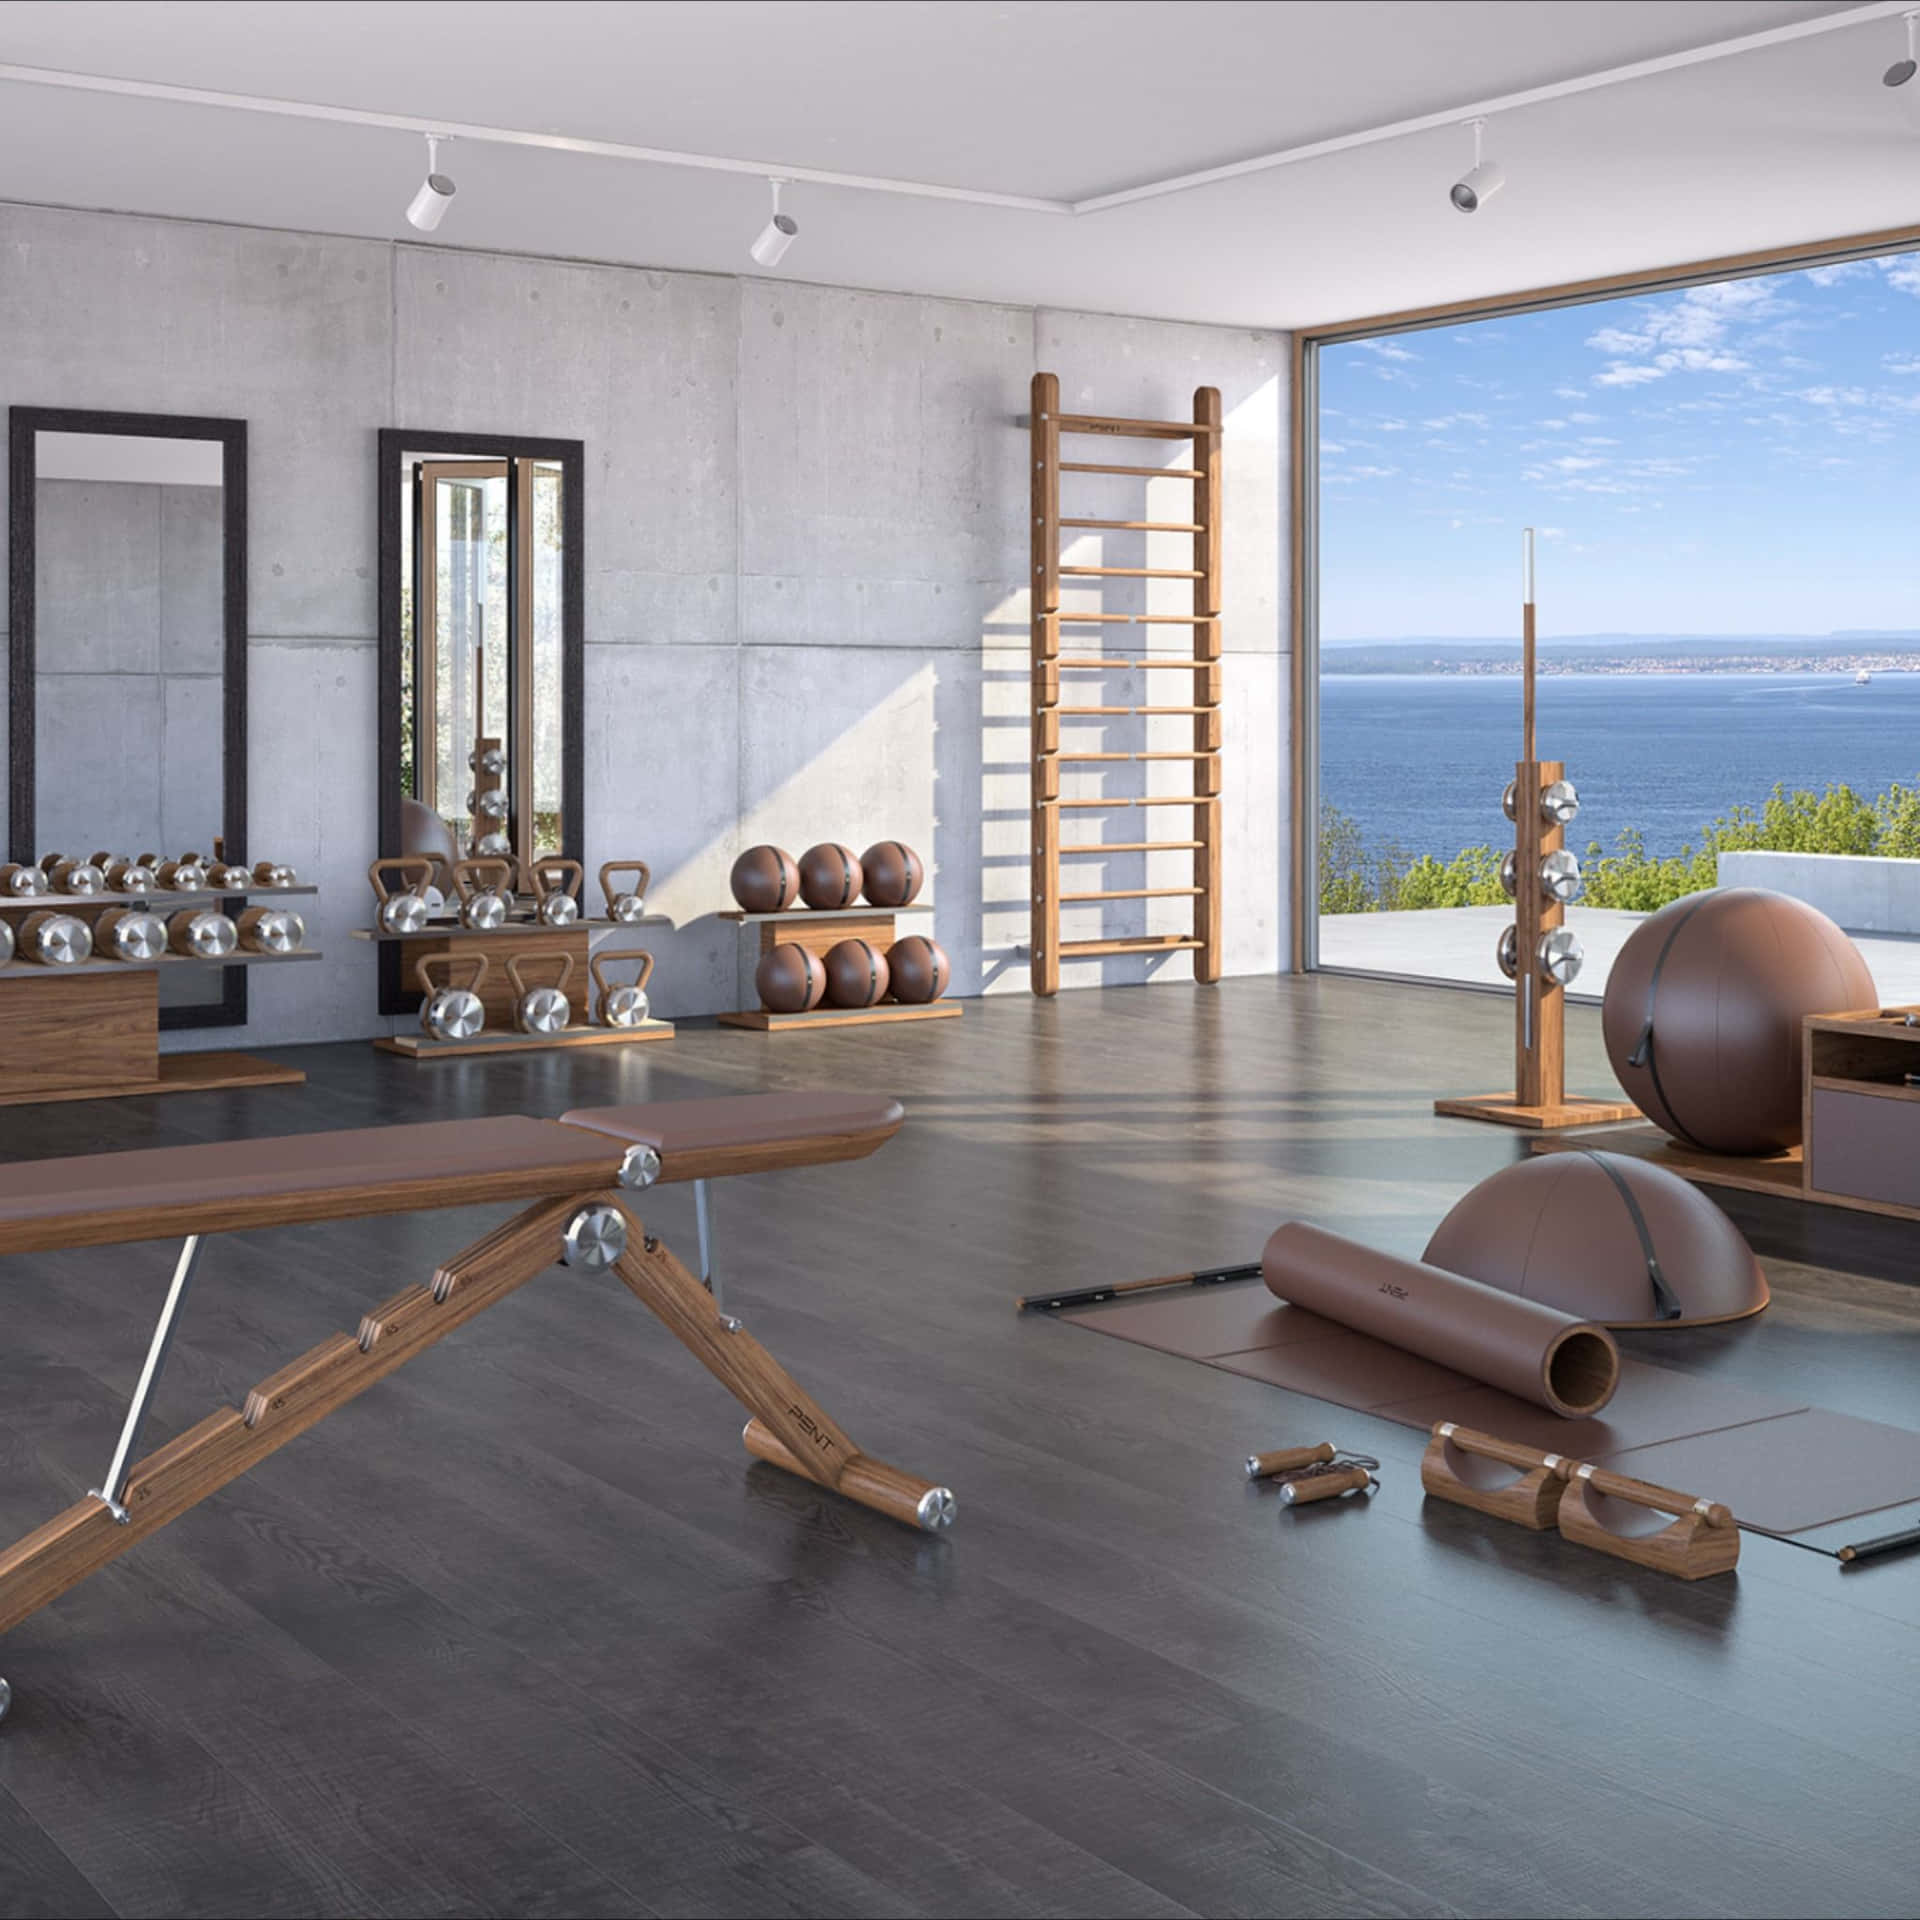 A Gym Room With A View Of The Ocean